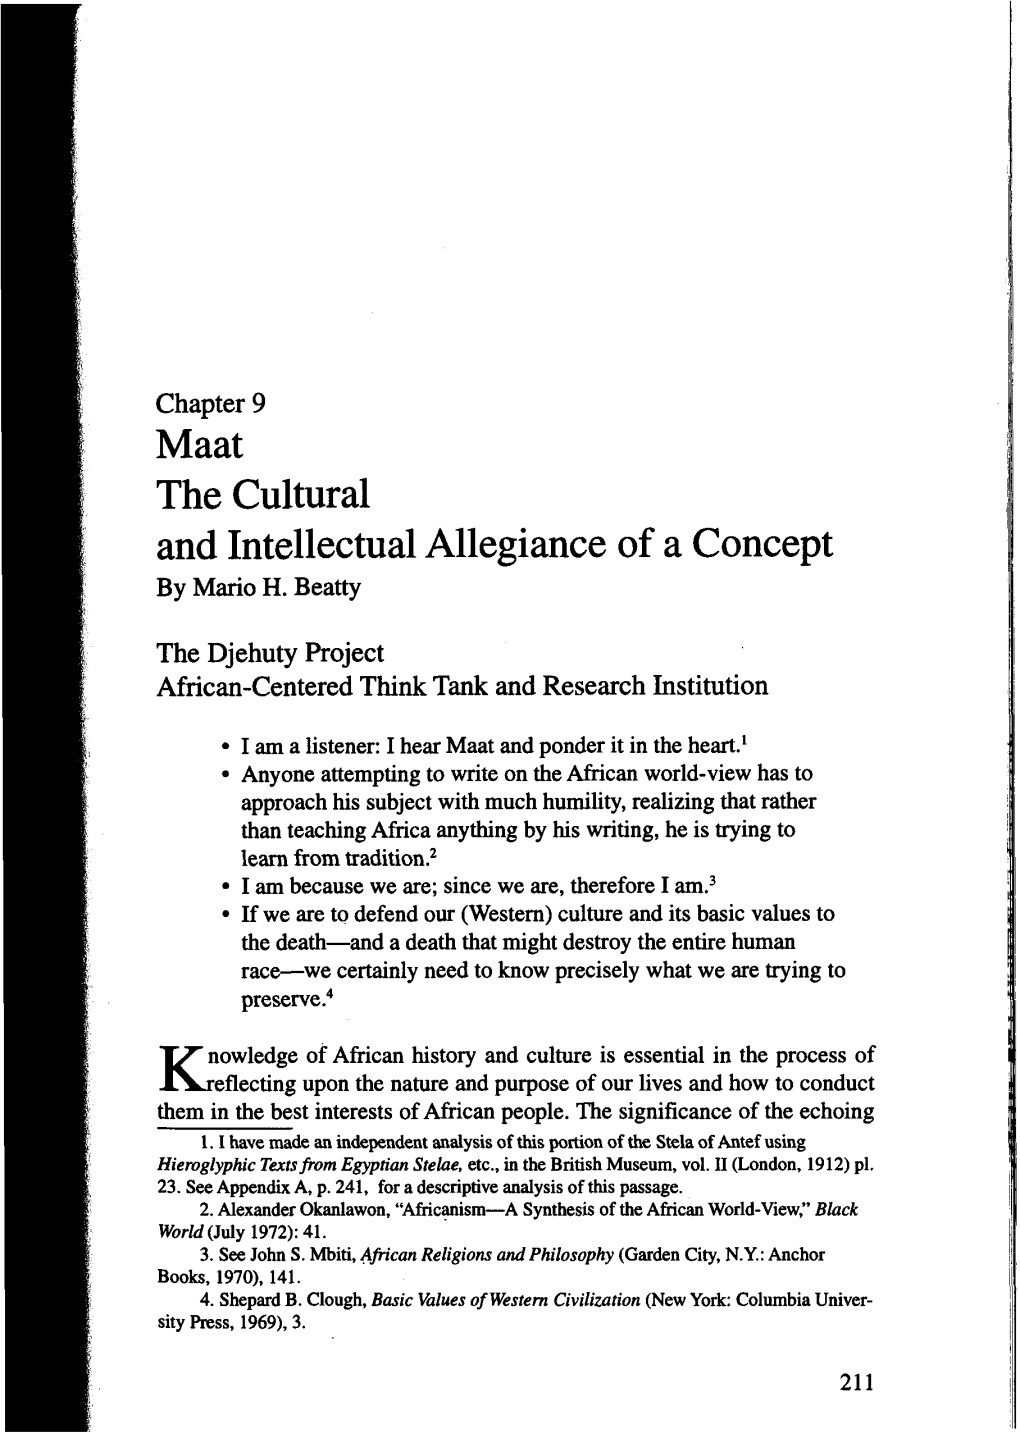 Maat the Cultural and Intellectual Allegiance of a Concept by Mario H